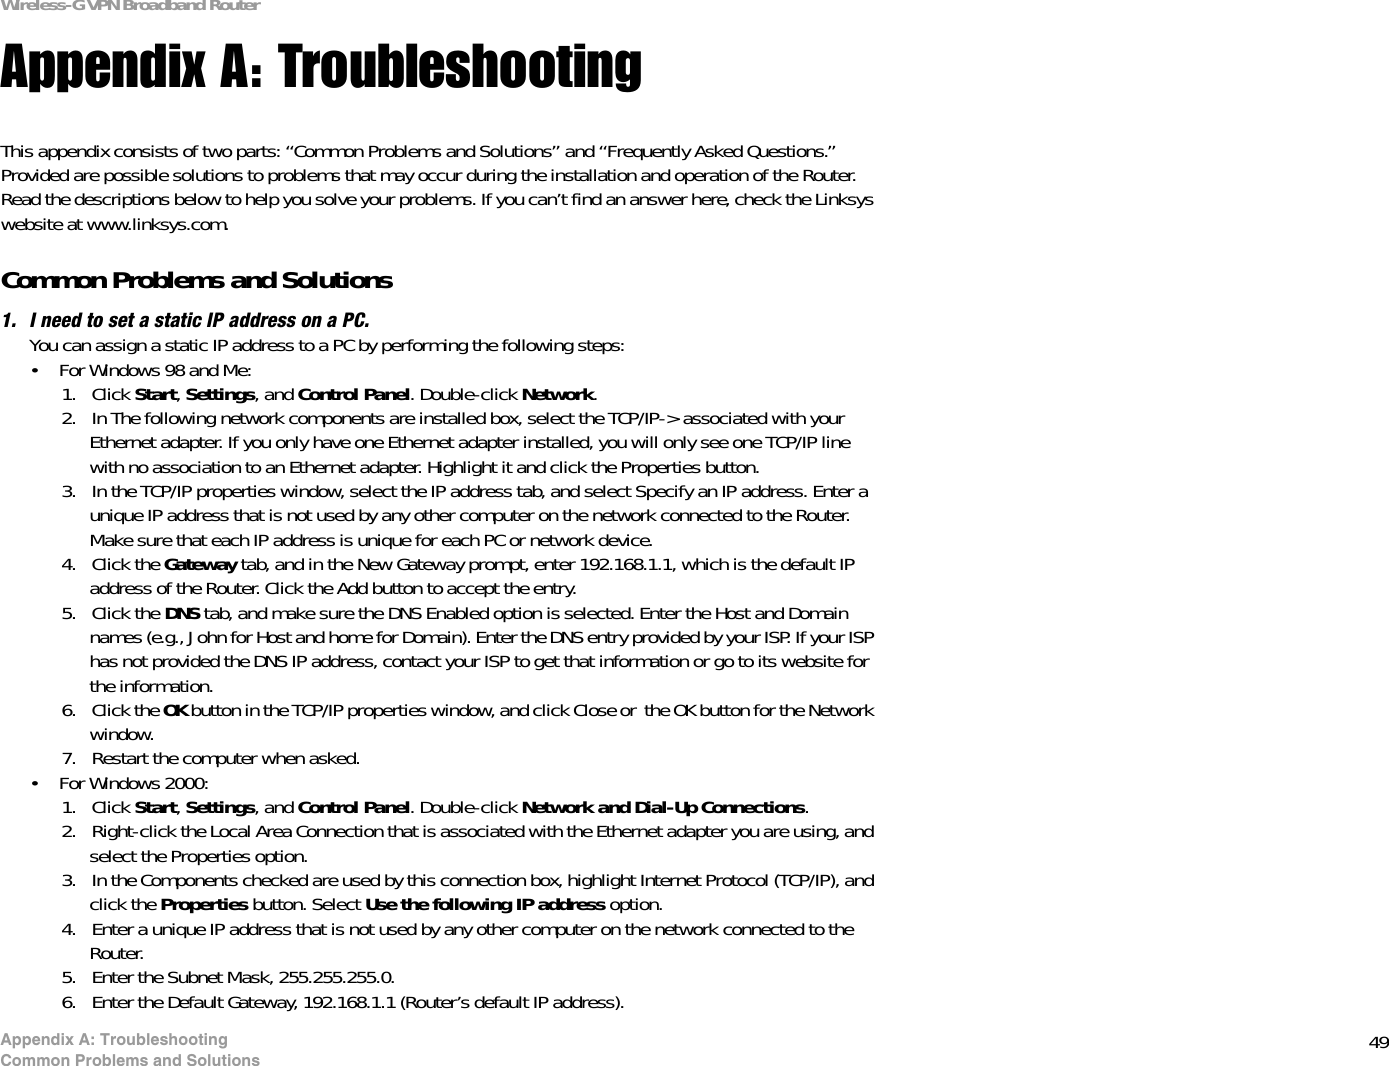 49Appendix A: TroubleshootingCommon Problems and SolutionsWireless-G VPN Broadband RouterAppendix A: TroubleshootingThis appendix consists of two parts: “Common Problems and Solutions” and “Frequently Asked Questions.” Provided are possible solutions to problems that may occur during the installation and operation of the Router. Read the descriptions below to help you solve your problems. If you can’t find an answer here, check the Linksys website at www.linksys.com.Common Problems and Solutions1. I need to set a static IP address on a PC.You can assign a static IP address to a PC by performing the following steps:• For Windows 98 and Me:1. Click Start,Settings, and Control Panel. Double-click Network.2. In The following network components are installed box, select the TCP/IP-&gt; associated with your Ethernet adapter. If you only have one Ethernet adapter installed, you will only see one TCP/IP line with no association to an Ethernet adapter. Highlight it and click the Properties button.3. In the TCP/IP properties window, select the IP address tab, and select Specify an IP address. Enter a unique IP address that is not used by any other computer on the network connected to the Router. Make sure that each IP address is unique for each PC or network device.4. Click the Gateway tab, and in the New Gateway prompt, enter 192.168.1.1, which is the default IP address of the Router. Click the Add button to accept the entry.5. Click the DNS tab, and make sure the DNS Enabled option is selected. Enter the Host and Domain names (e.g., John for Host and home for Domain). Enter the DNS entry provided by your ISP. If your ISP has not provided the DNS IP address, contact your ISP to get that information or go to its website for the information.6. Click the OK button in the TCP/IP properties window, and click Close or  the OK button for the Network window.7. Restart the computer when asked.• For Windows 2000:1. Click Start,Settings, and Control Panel. Double-click Network and Dial-Up Connections.2. Right-click the Local Area Connection that is associated with the Ethernet adapter you are using, and select the Properties option.3. In the Components checked are used by this connection box, highlight Internet Protocol (TCP/IP), and click the Properties button. Select Use the following IP address option.4. Enter a unique IP address that is not used by any other computer on the network connected to the Router. 5. Enter the Subnet Mask, 255.255.255.0.6. Enter the Default Gateway, 192.168.1.1 (Router’s default IP address).